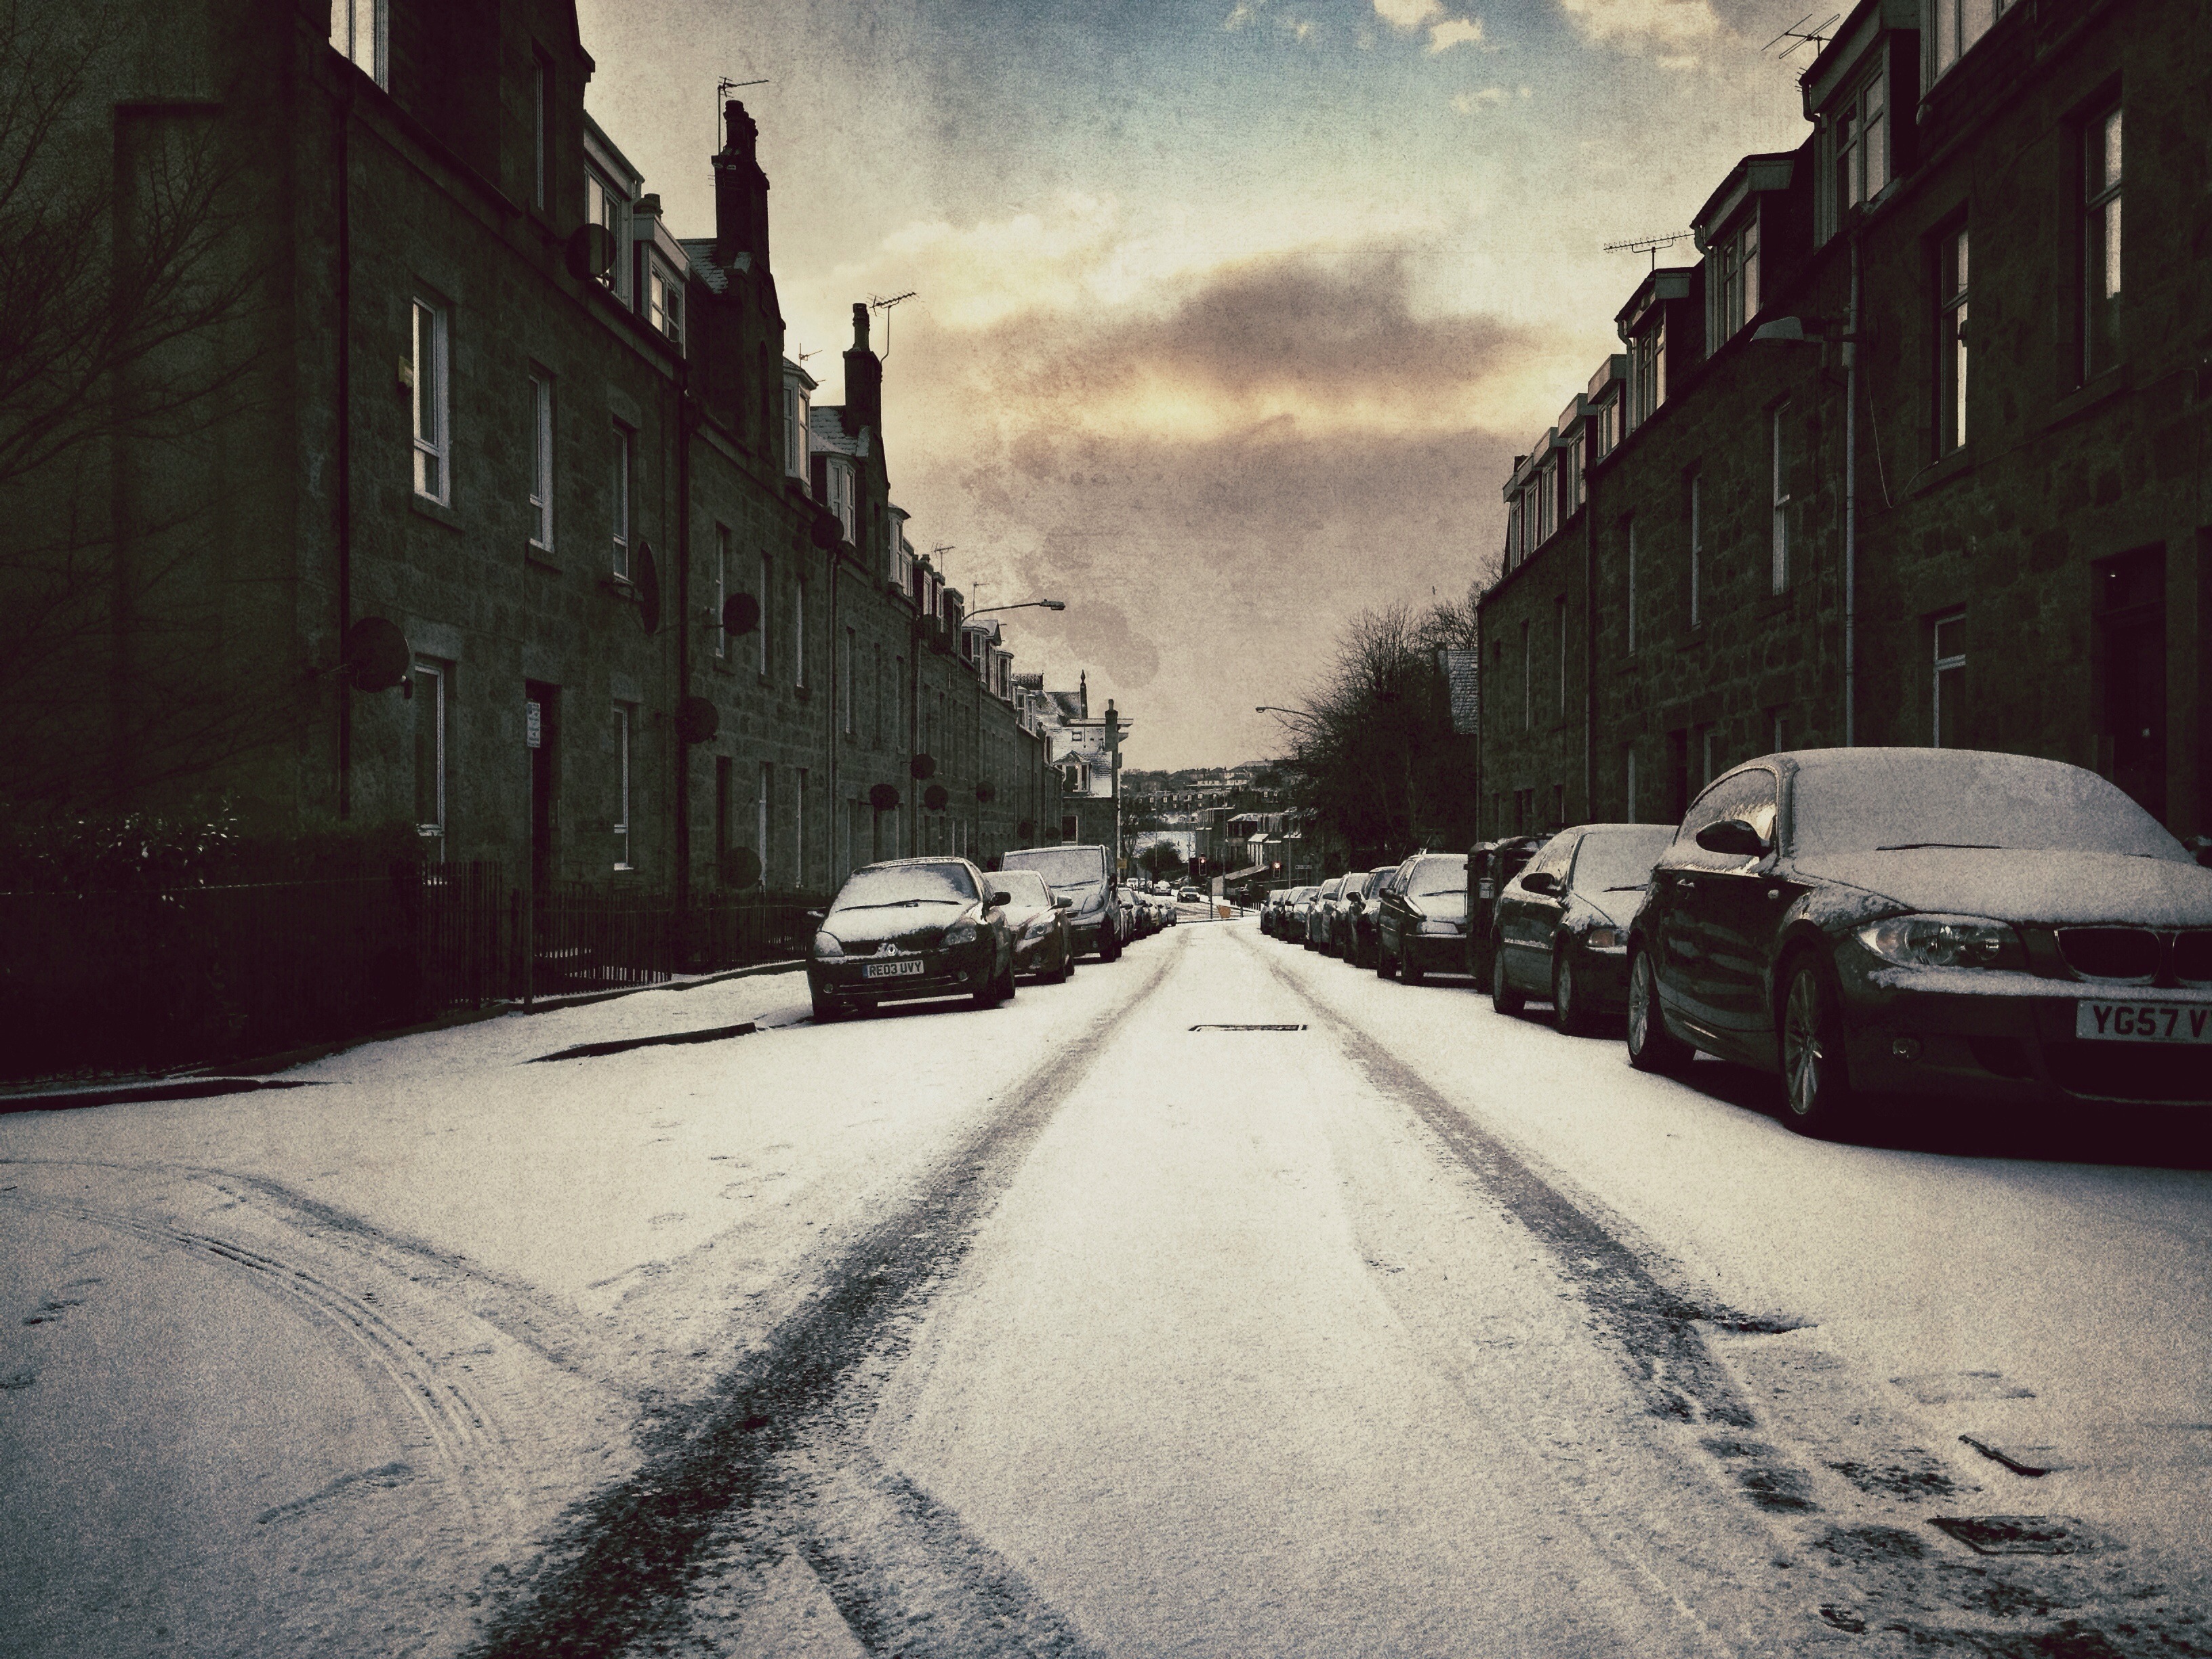 Photograph: Snowy Road